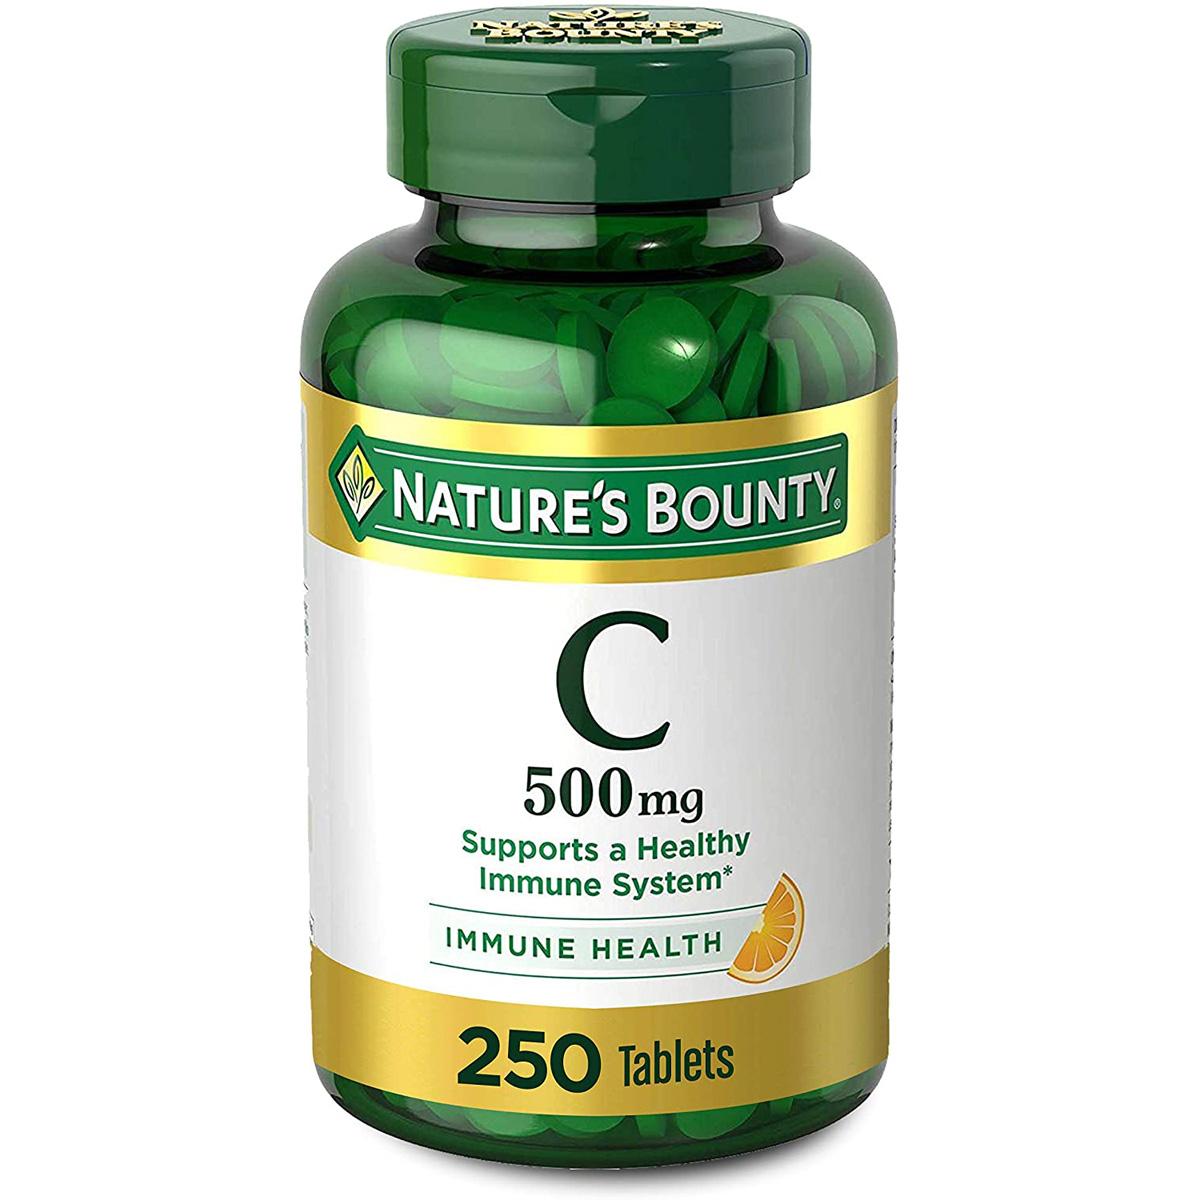 Vitamin C by Natures Bounty for Immune Support for $6.91 Shipped